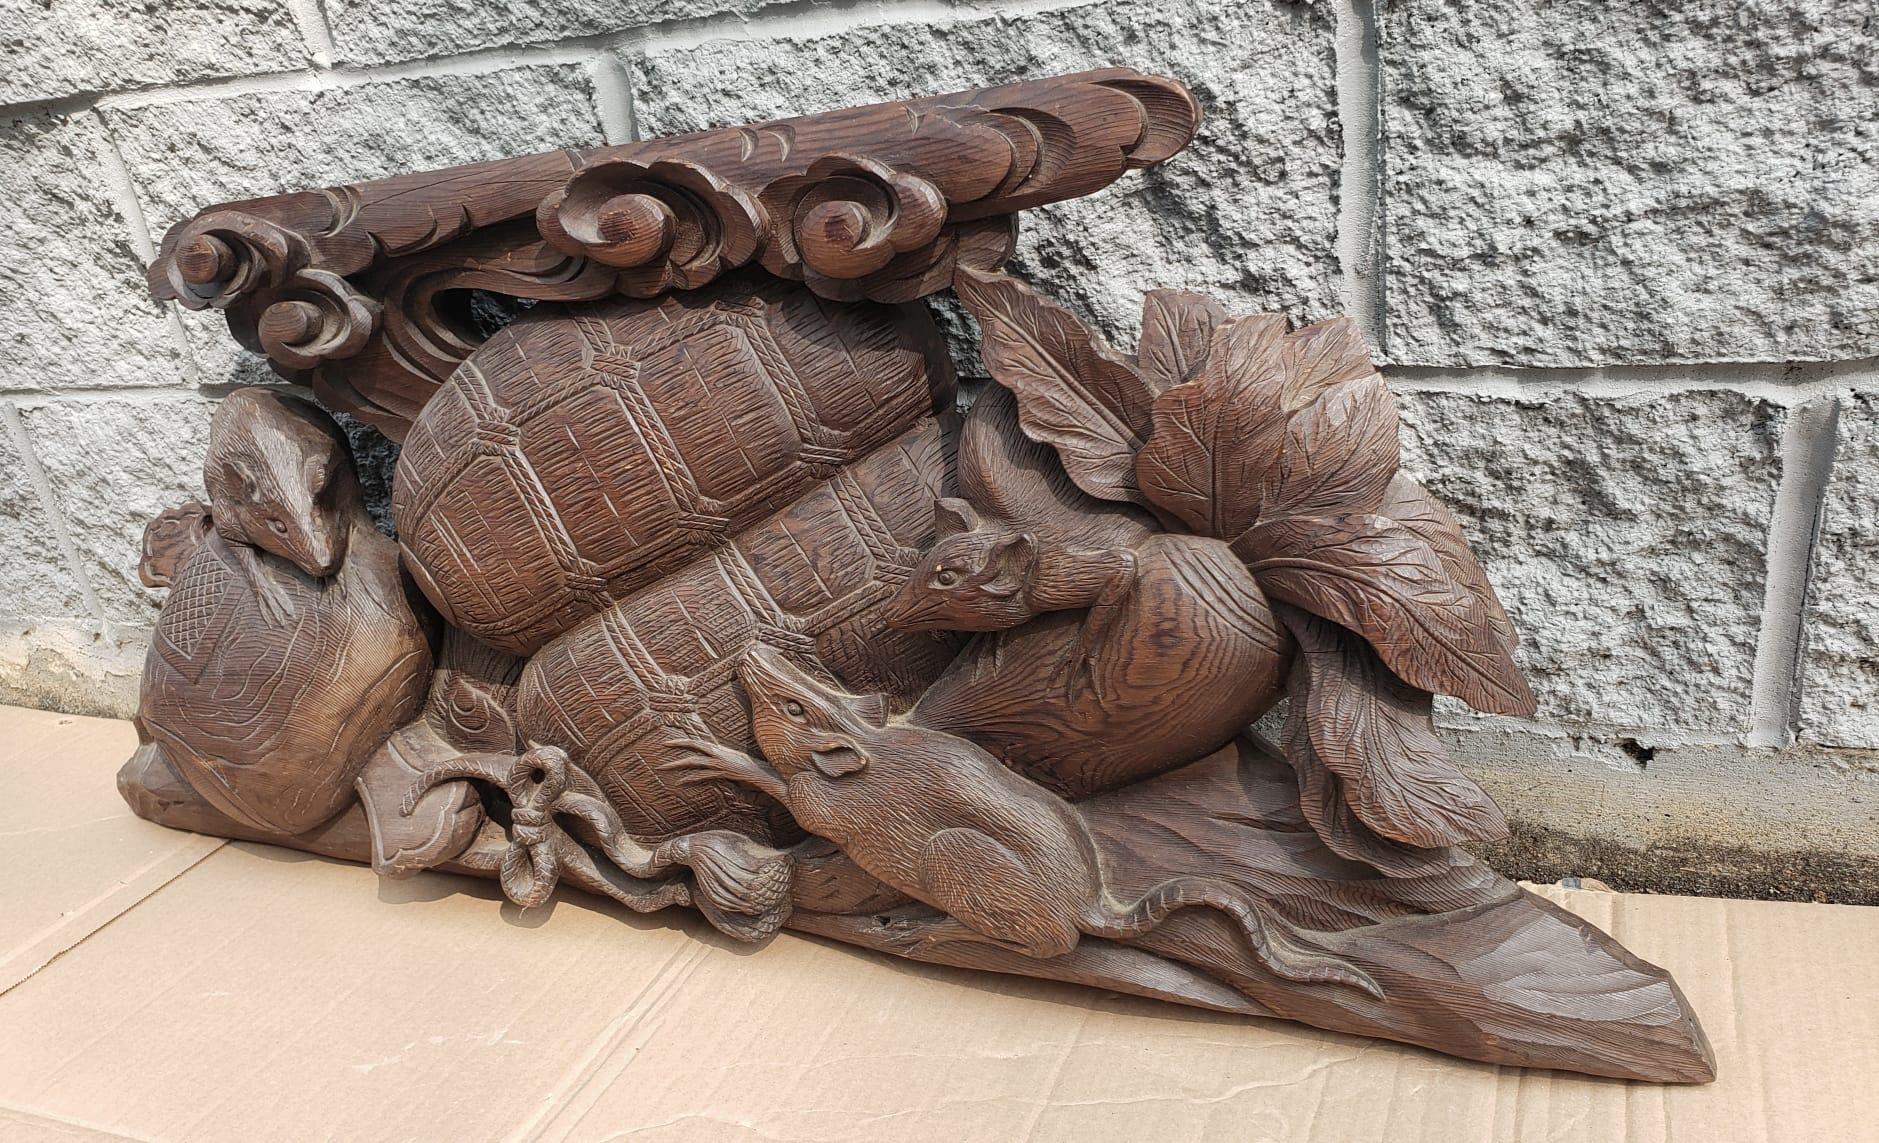 A Large realistic Japanese Stained Pine  Carving Scupture of Rodents And Baskets.
Measures 42.5